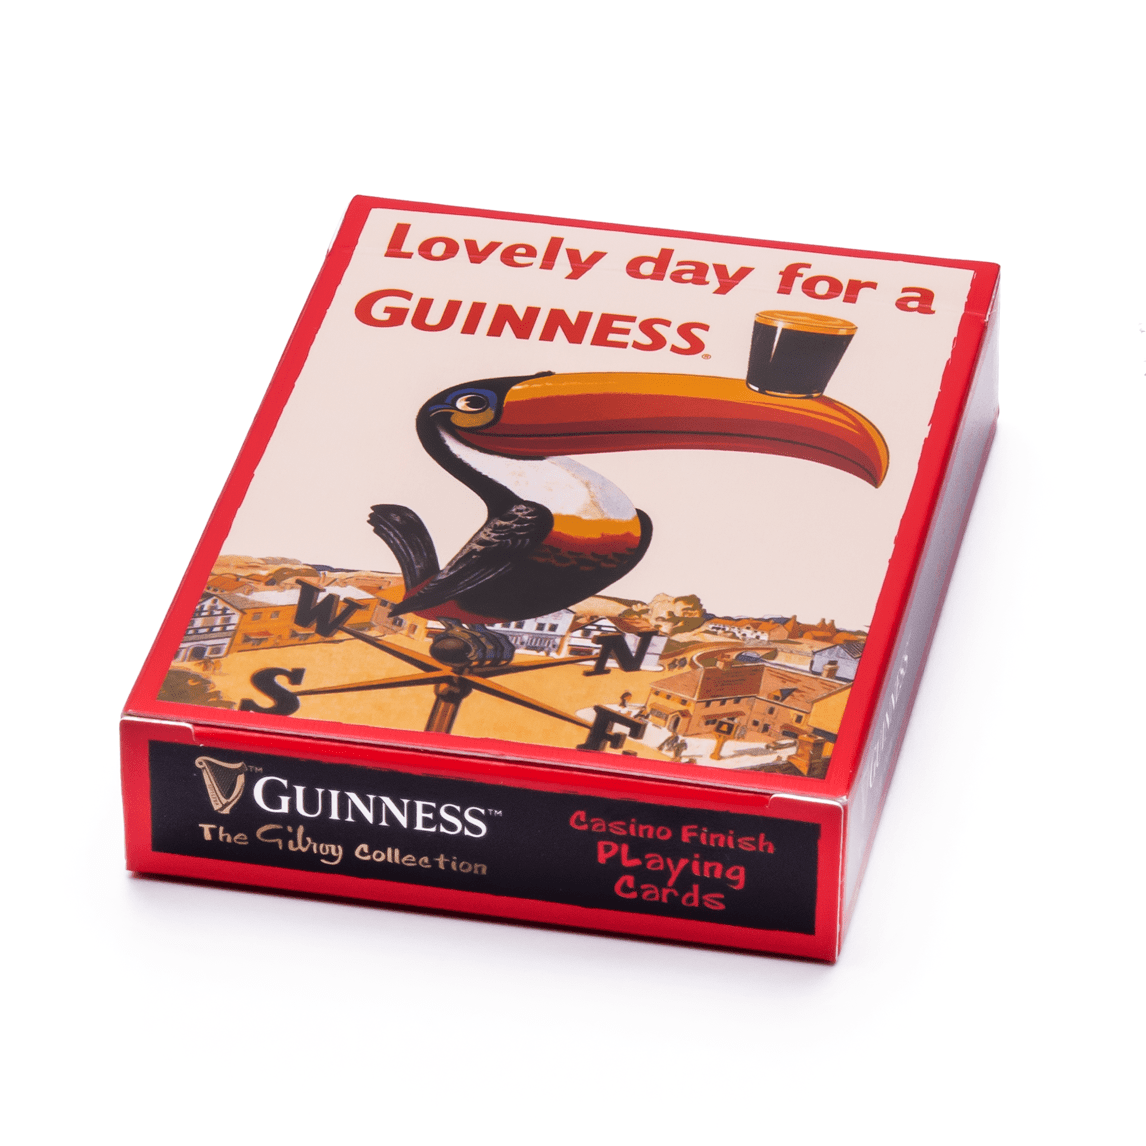 Looking for a perfect bar gift or merchandise? Look no further! Enjoy a lovely day with Guinness Ultimate Toucan Home Bar Pack playing cards.